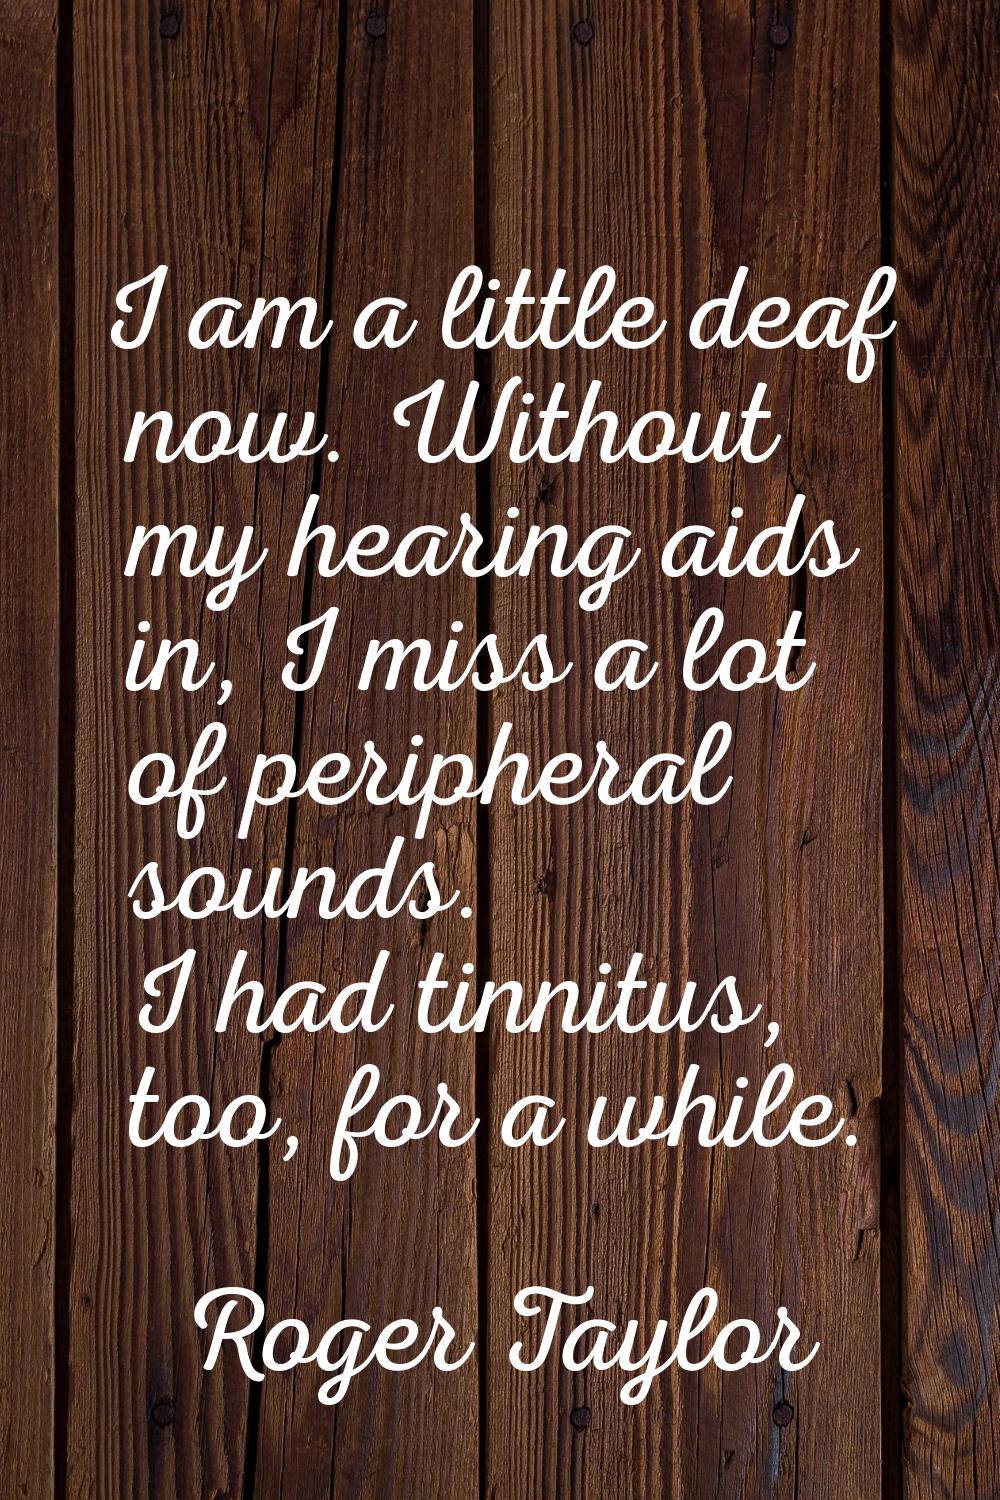 I am a little deaf now. Without my hearing aids in, I miss a lot of peripheral sounds. I had tinnit